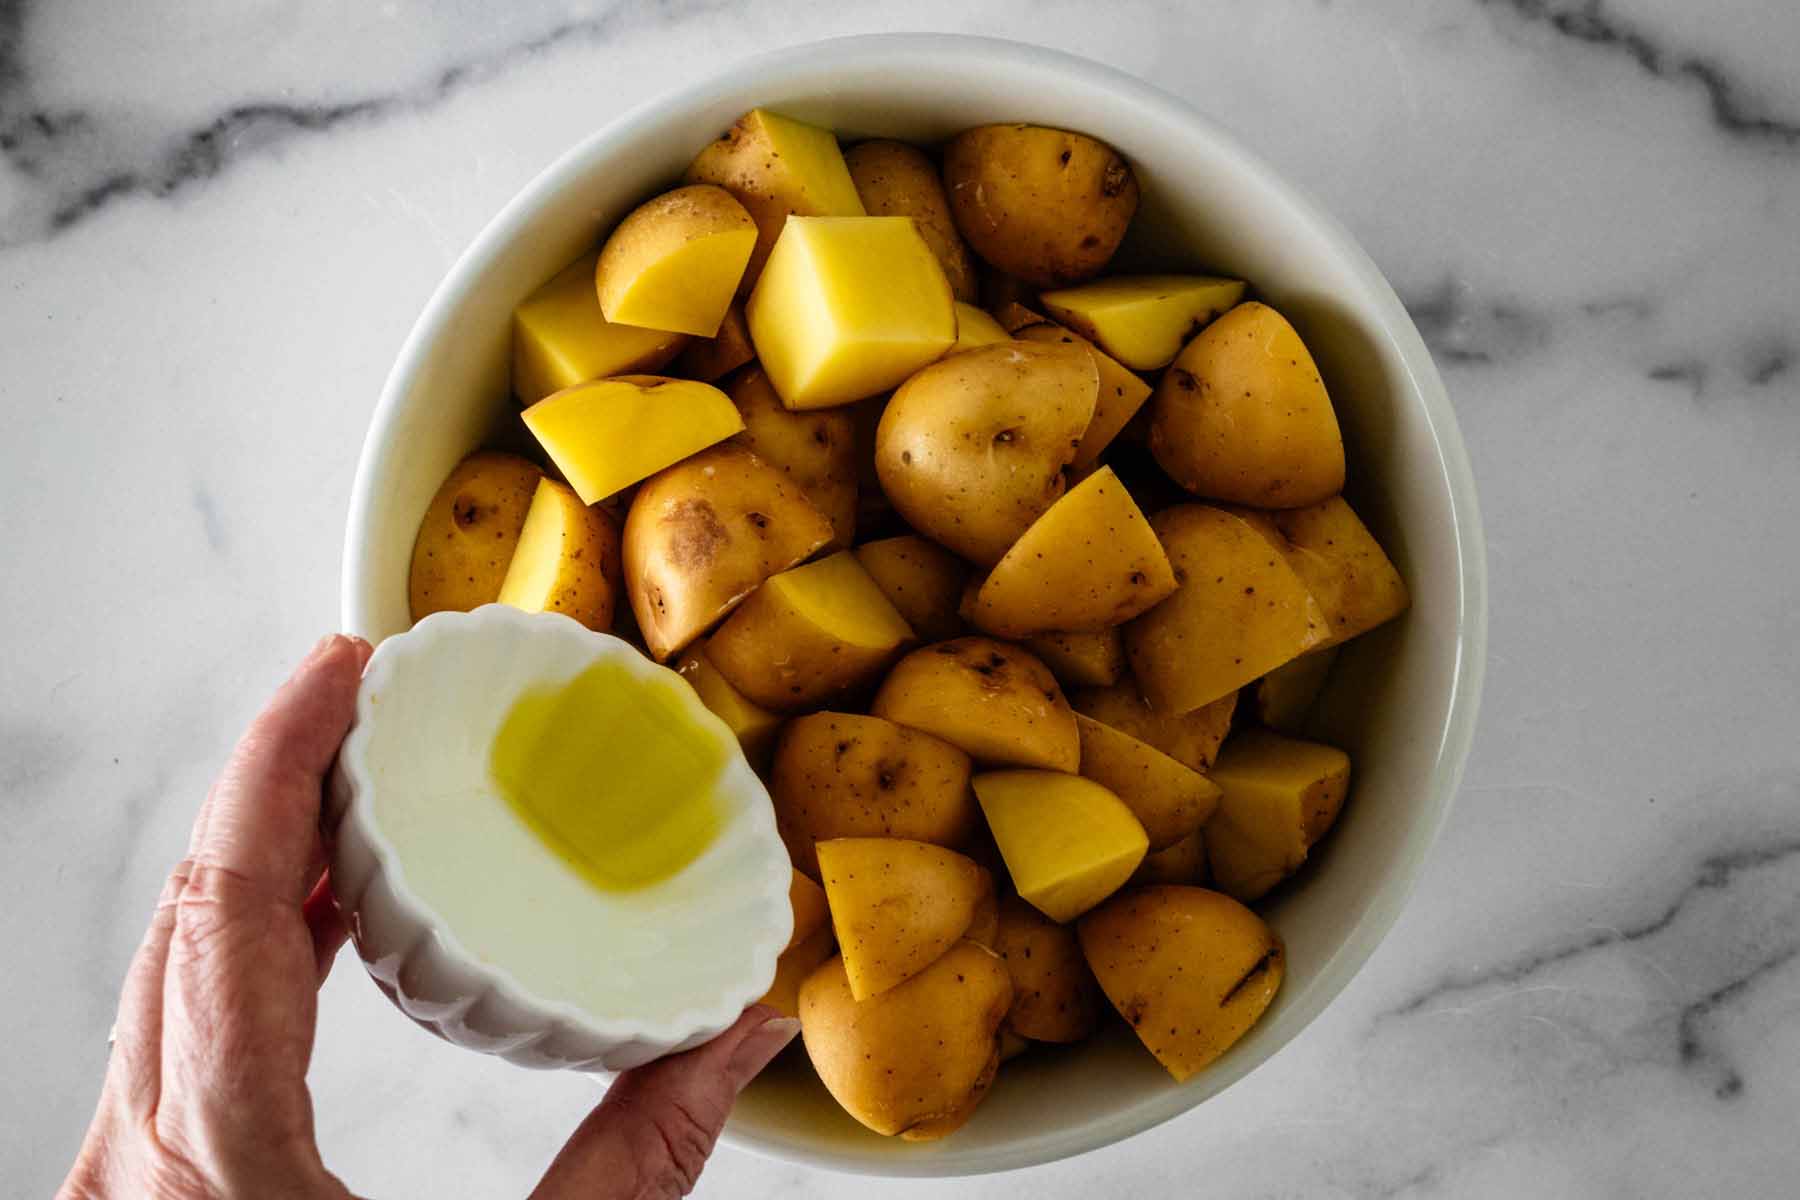 Olive oil is poured into a bowl of chopped golden potatoes